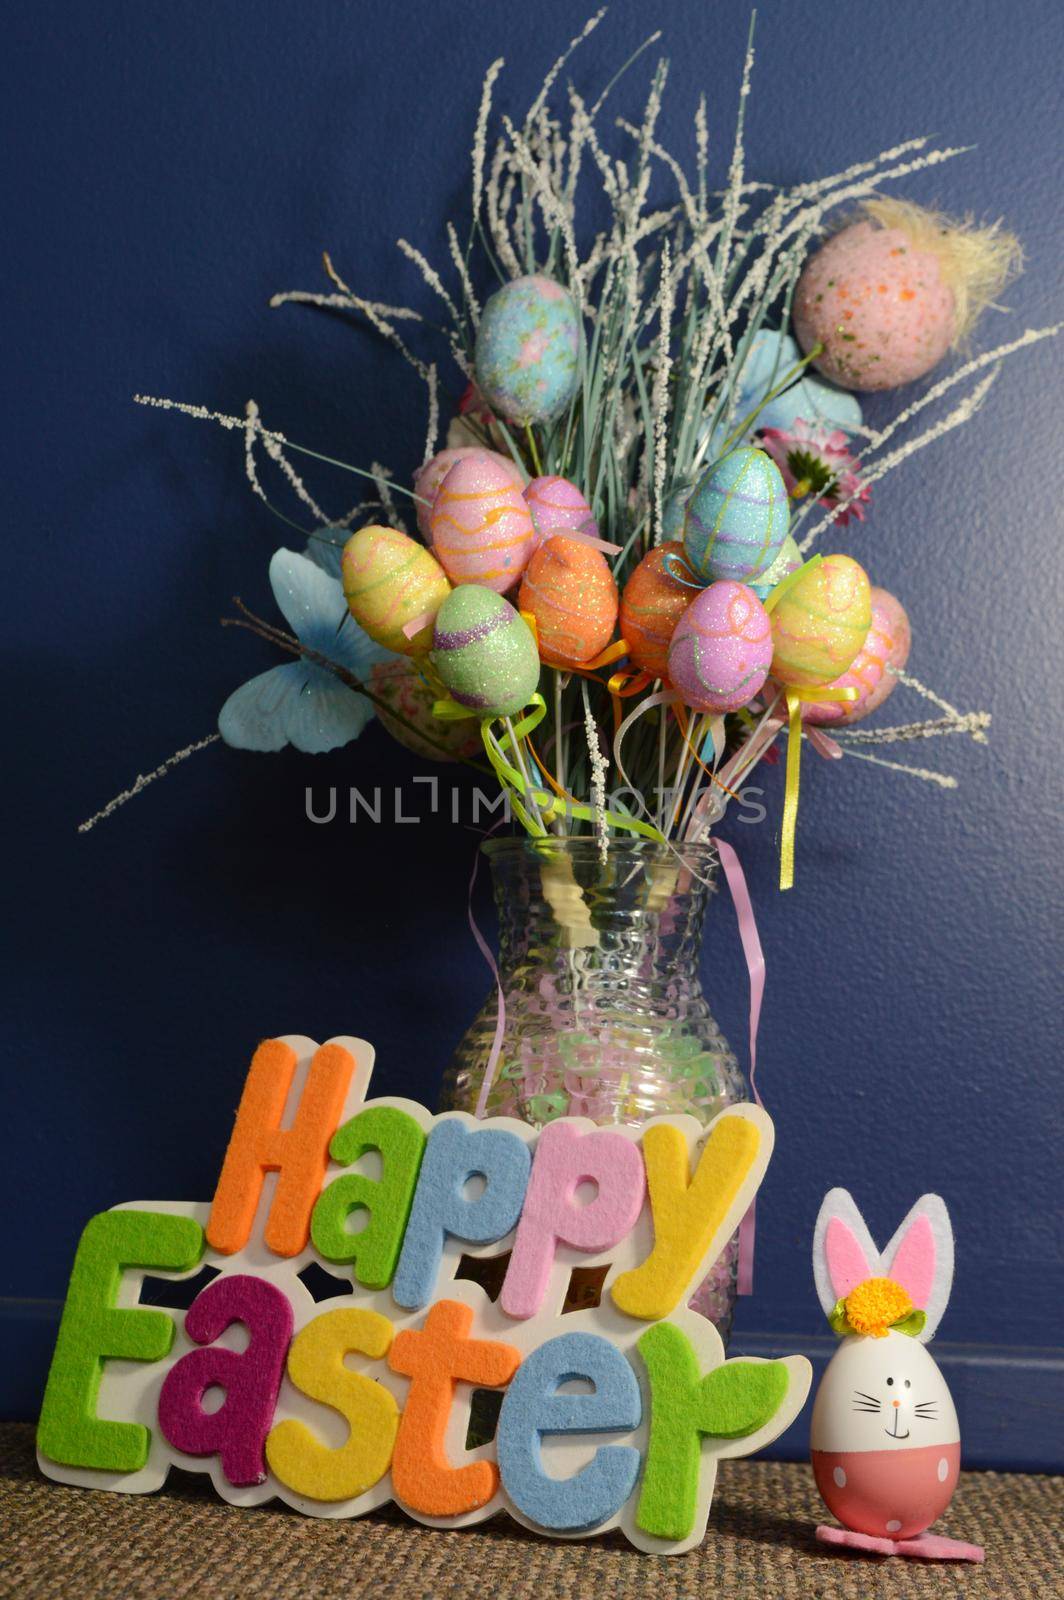 Happy Easter Bouquet by AlphaBaby